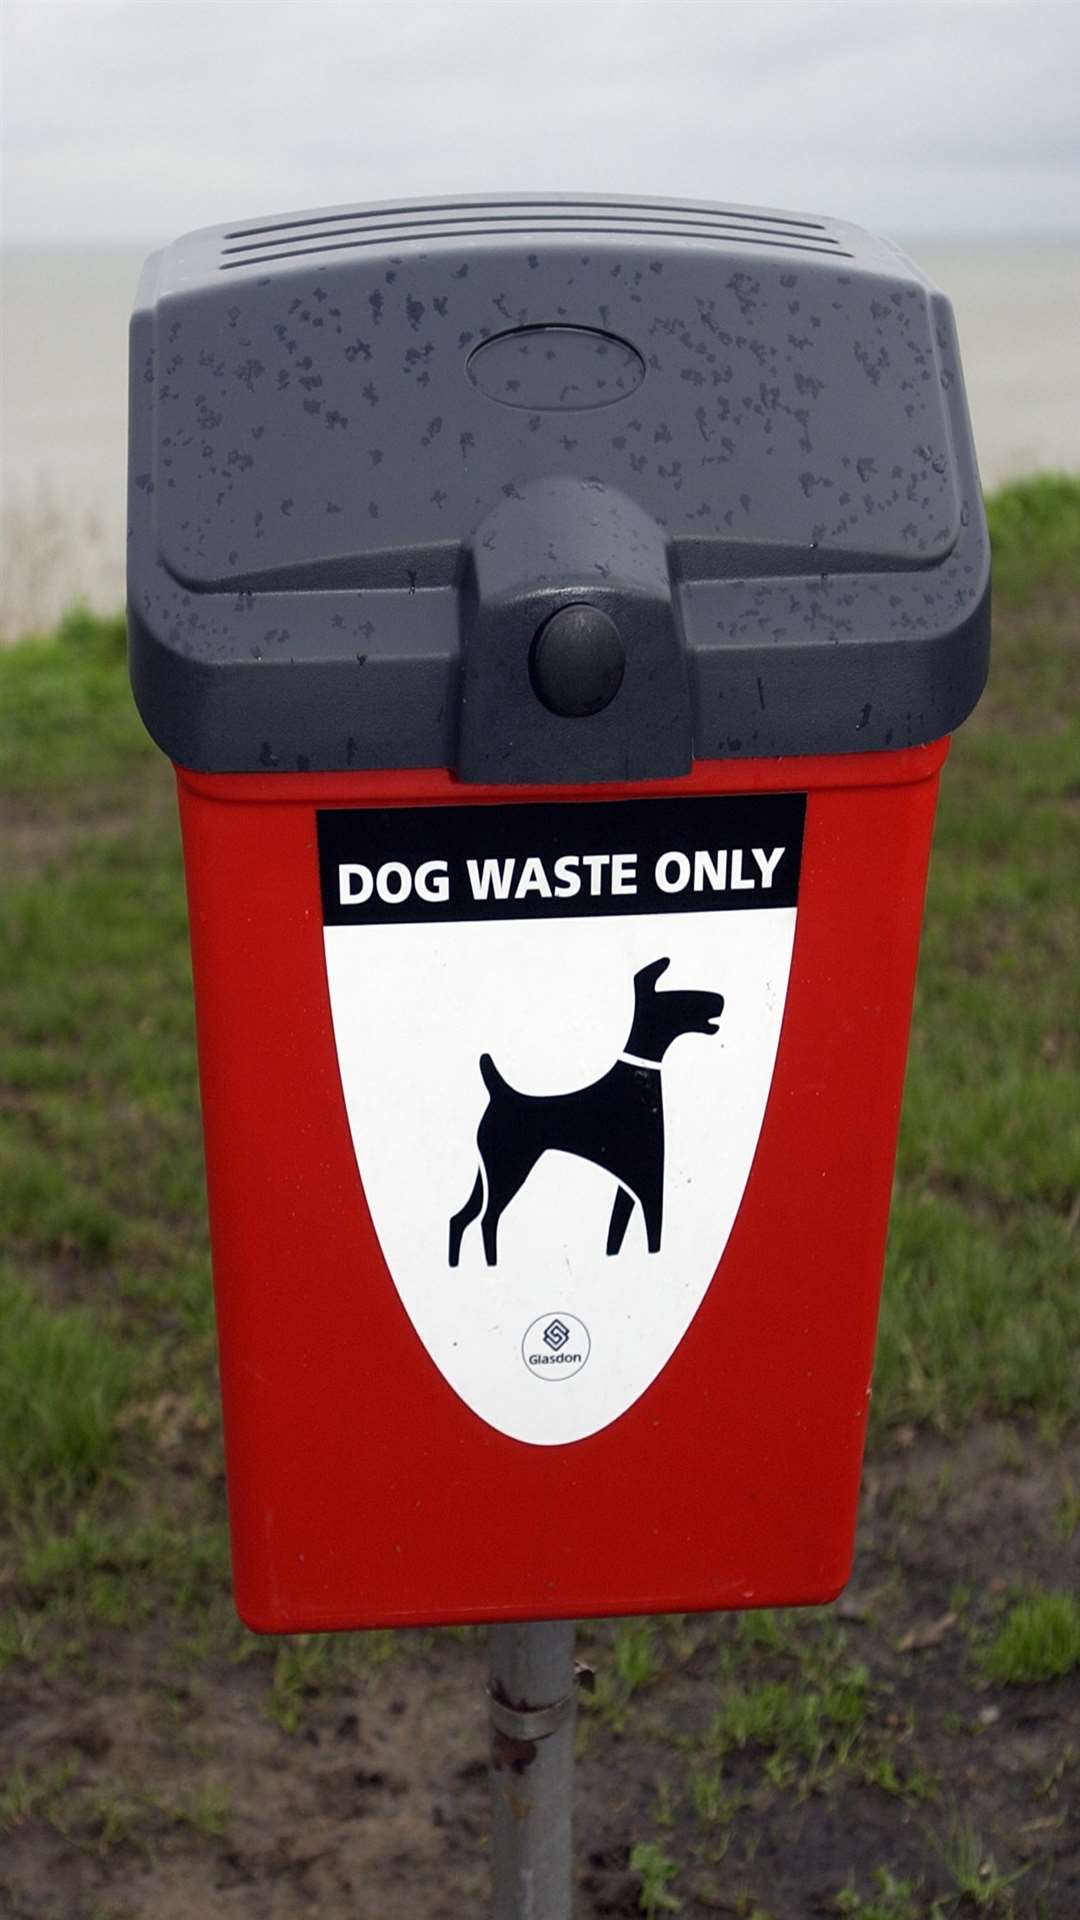 Yobs placed dog mess in a post box instead of a designated dog waste bin